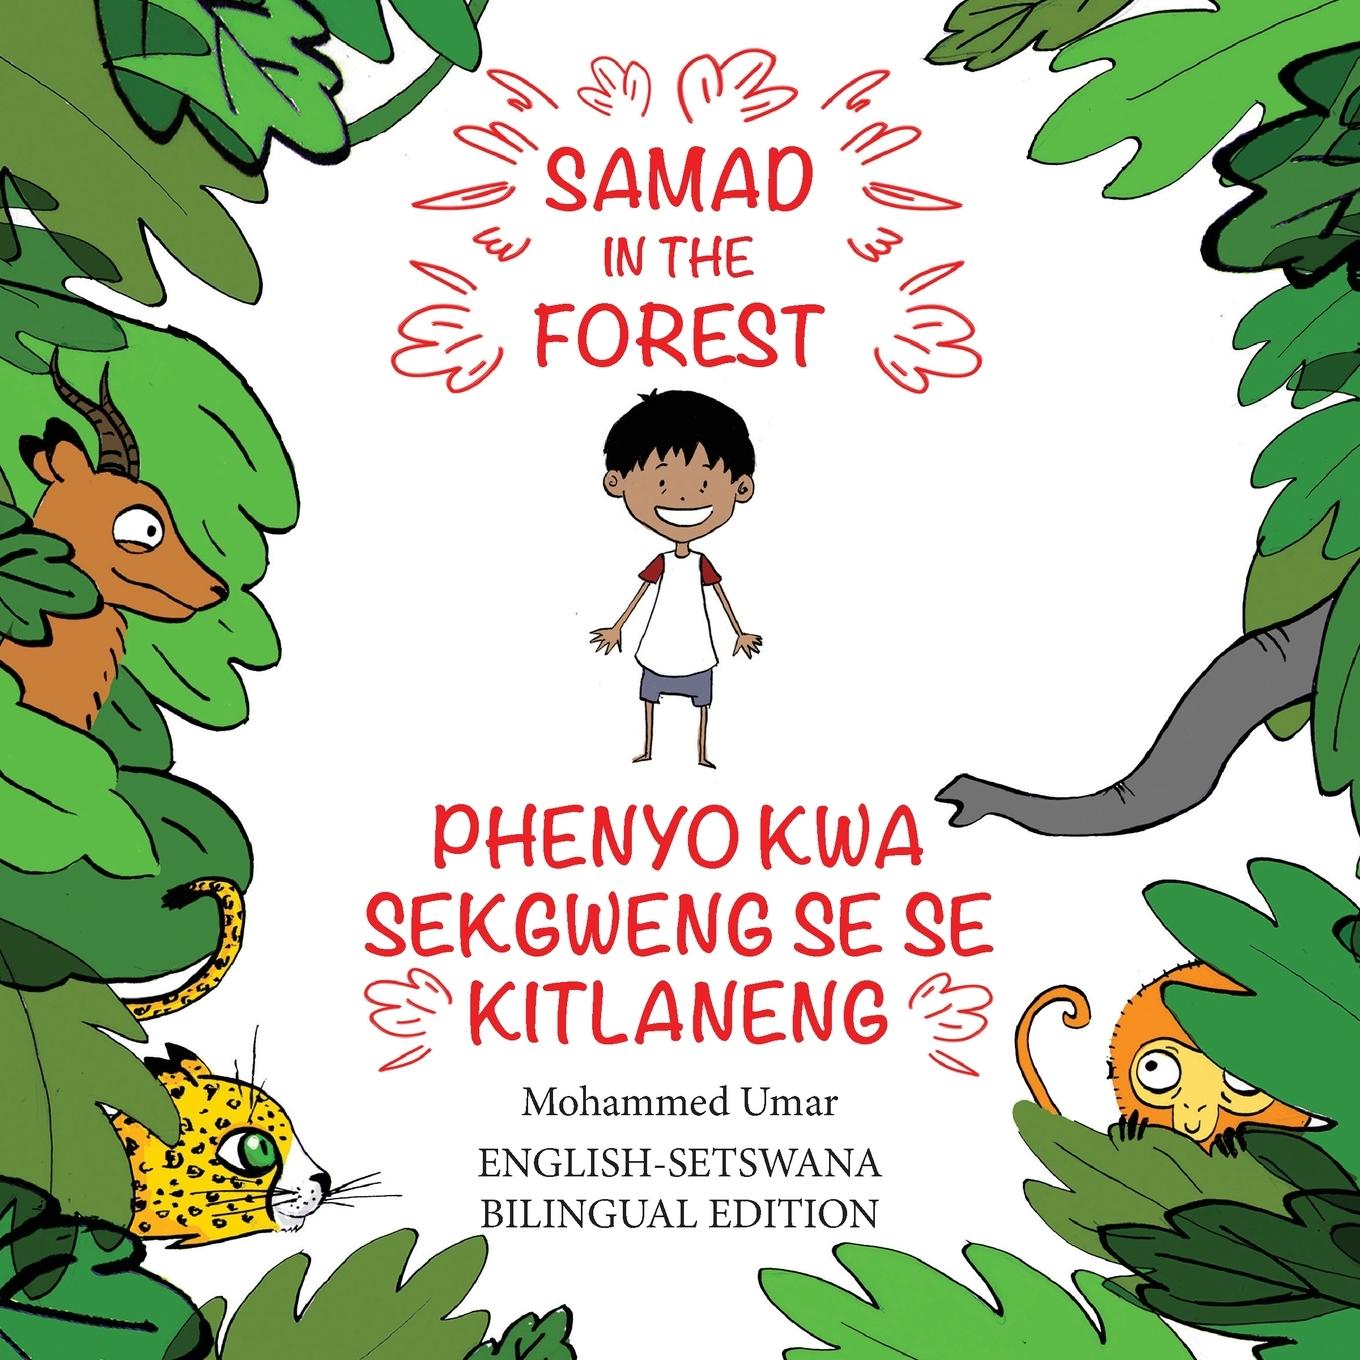 Book Samad in the Forest: English - Setswana Bilingual Edition 